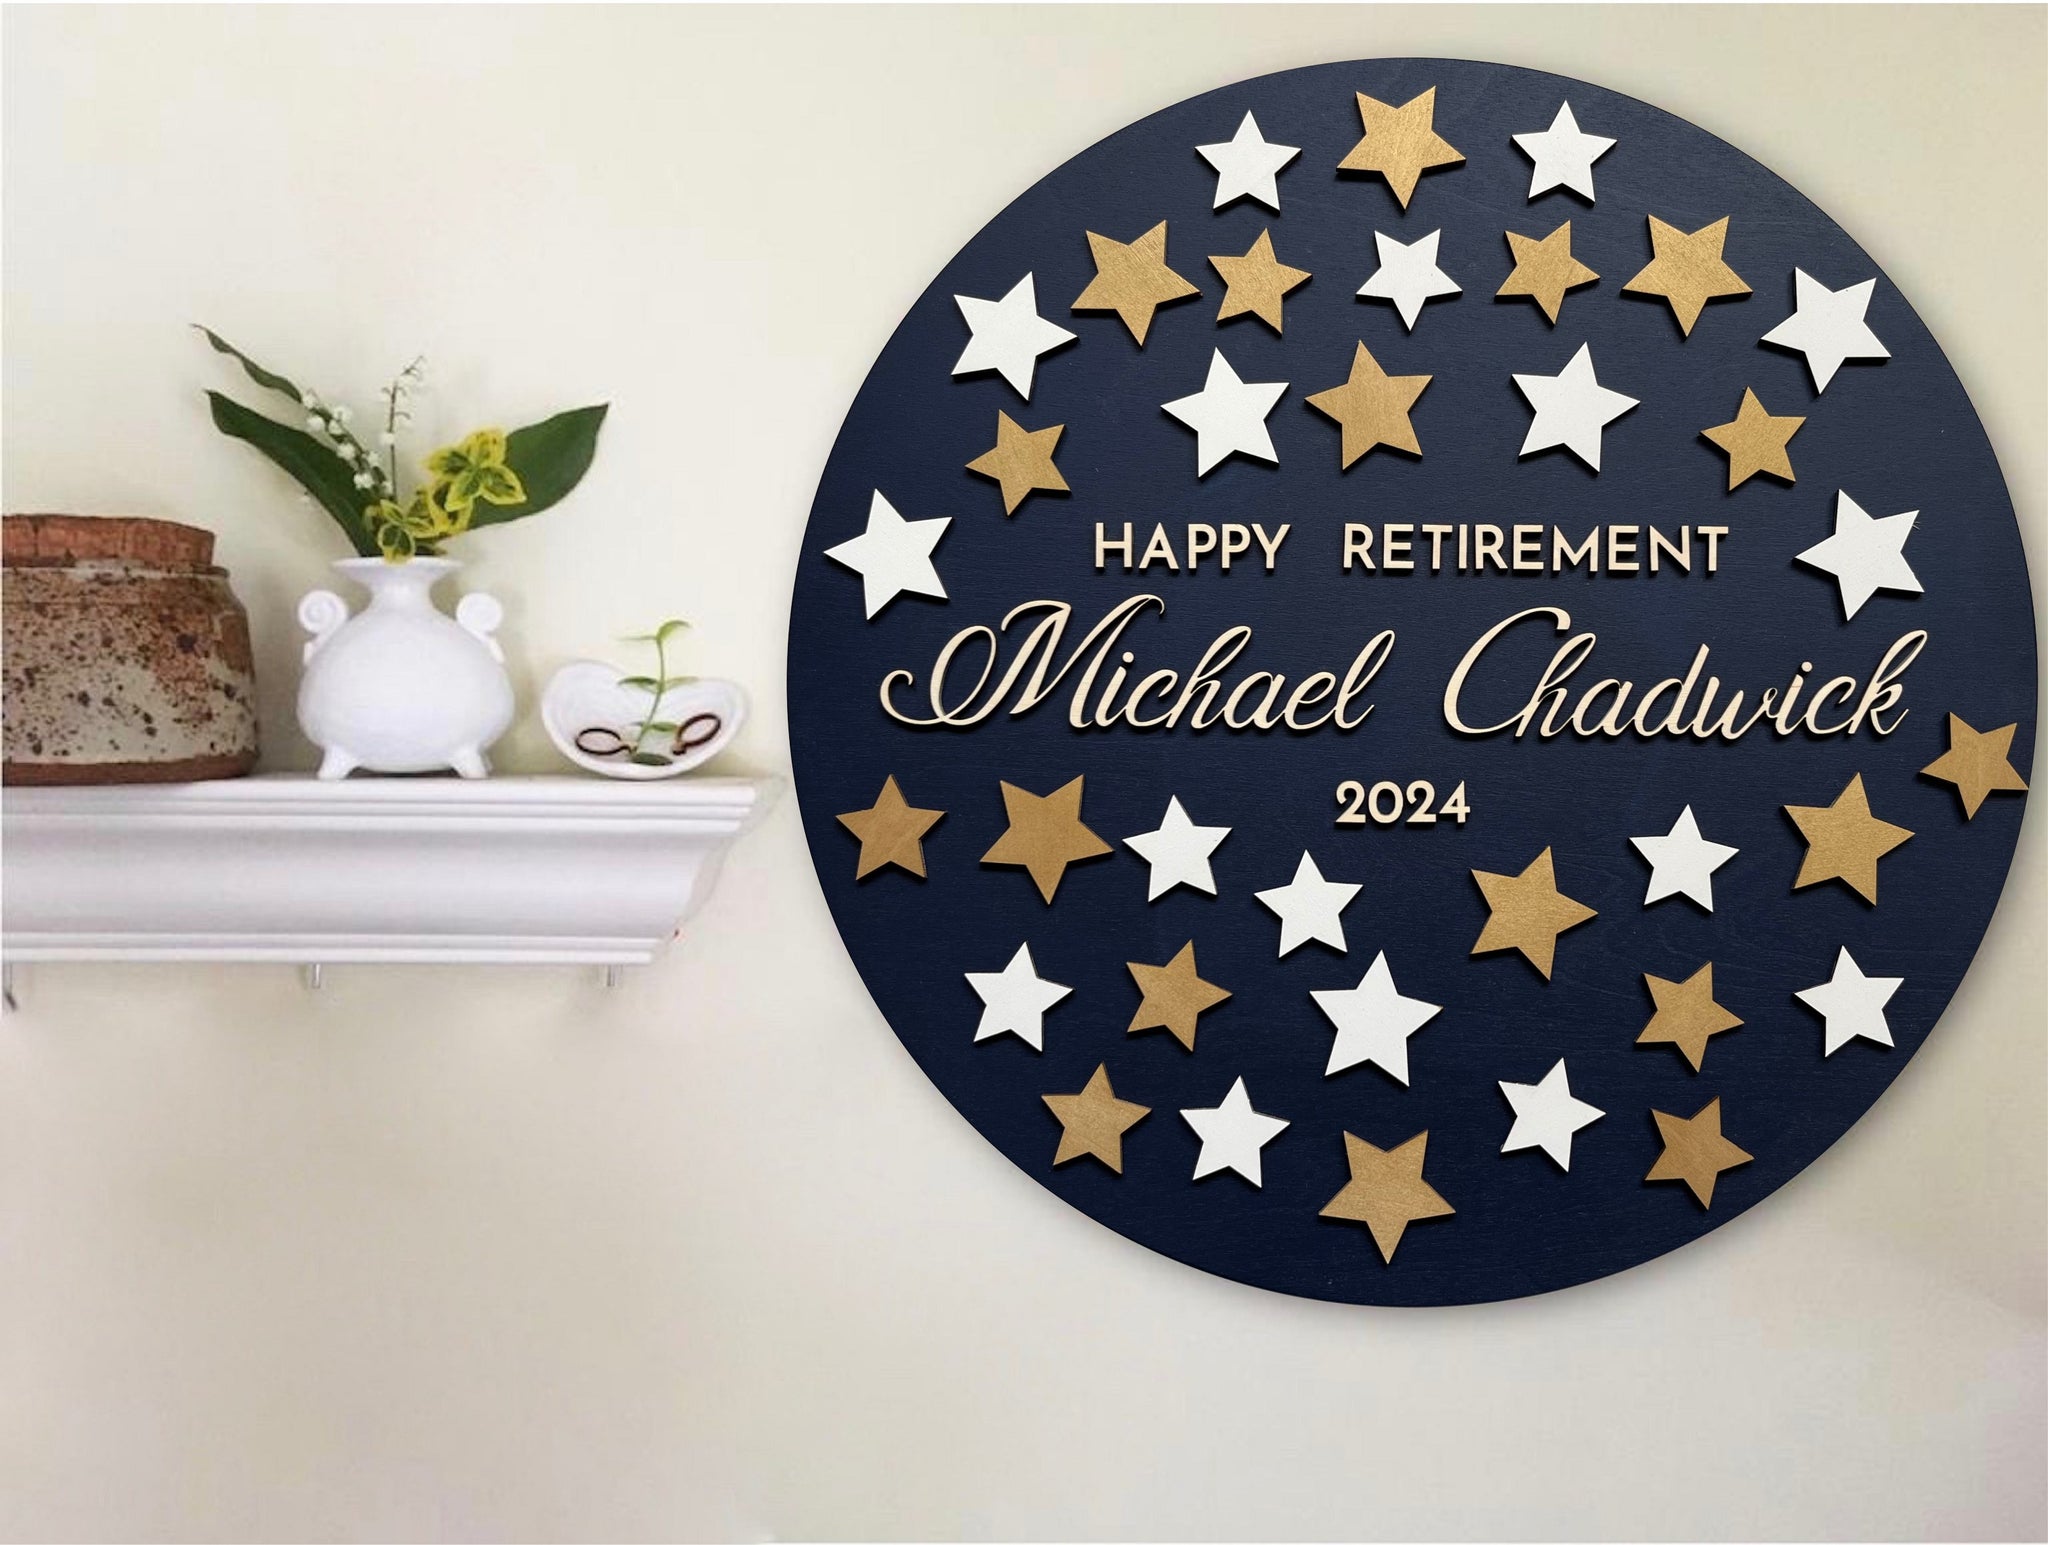 round guest book alternative for retirement with gold and white stars to sign